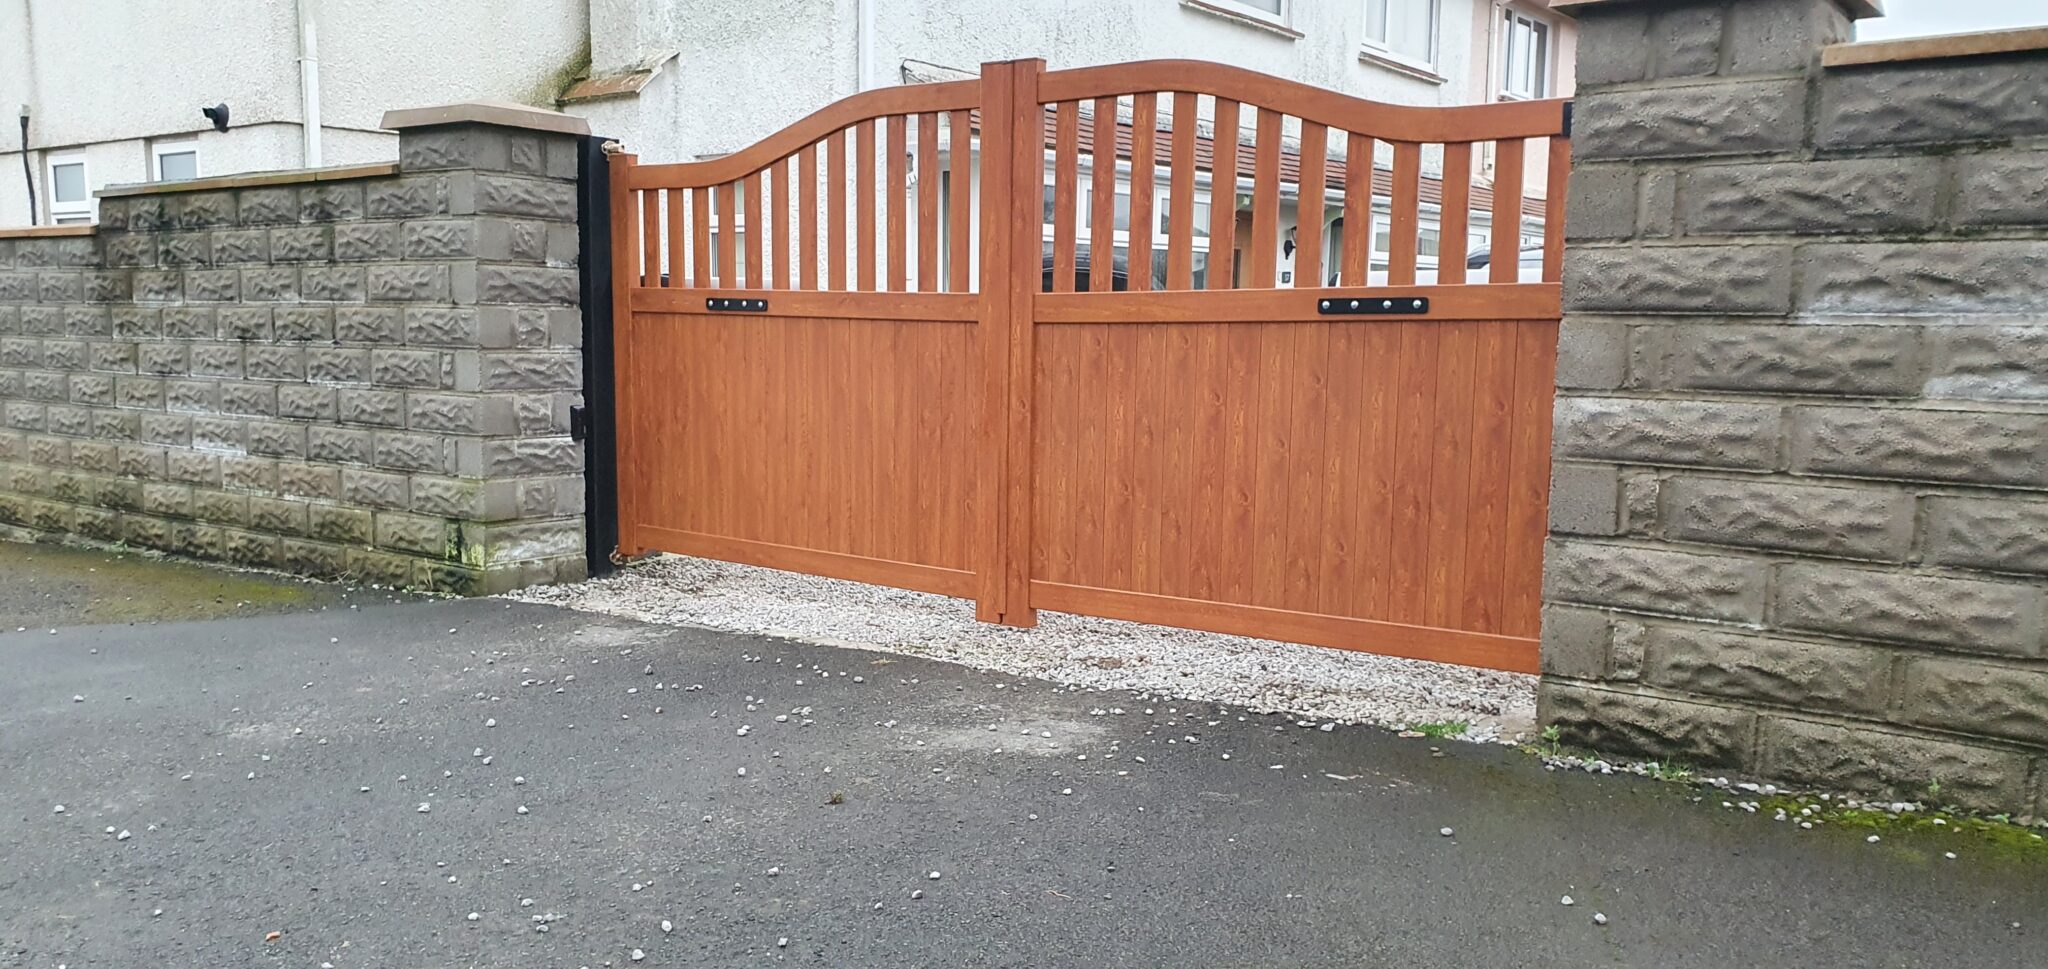 Aluminium gate - CL05 Renoir with wood effect electric gate using above ground automation Front view